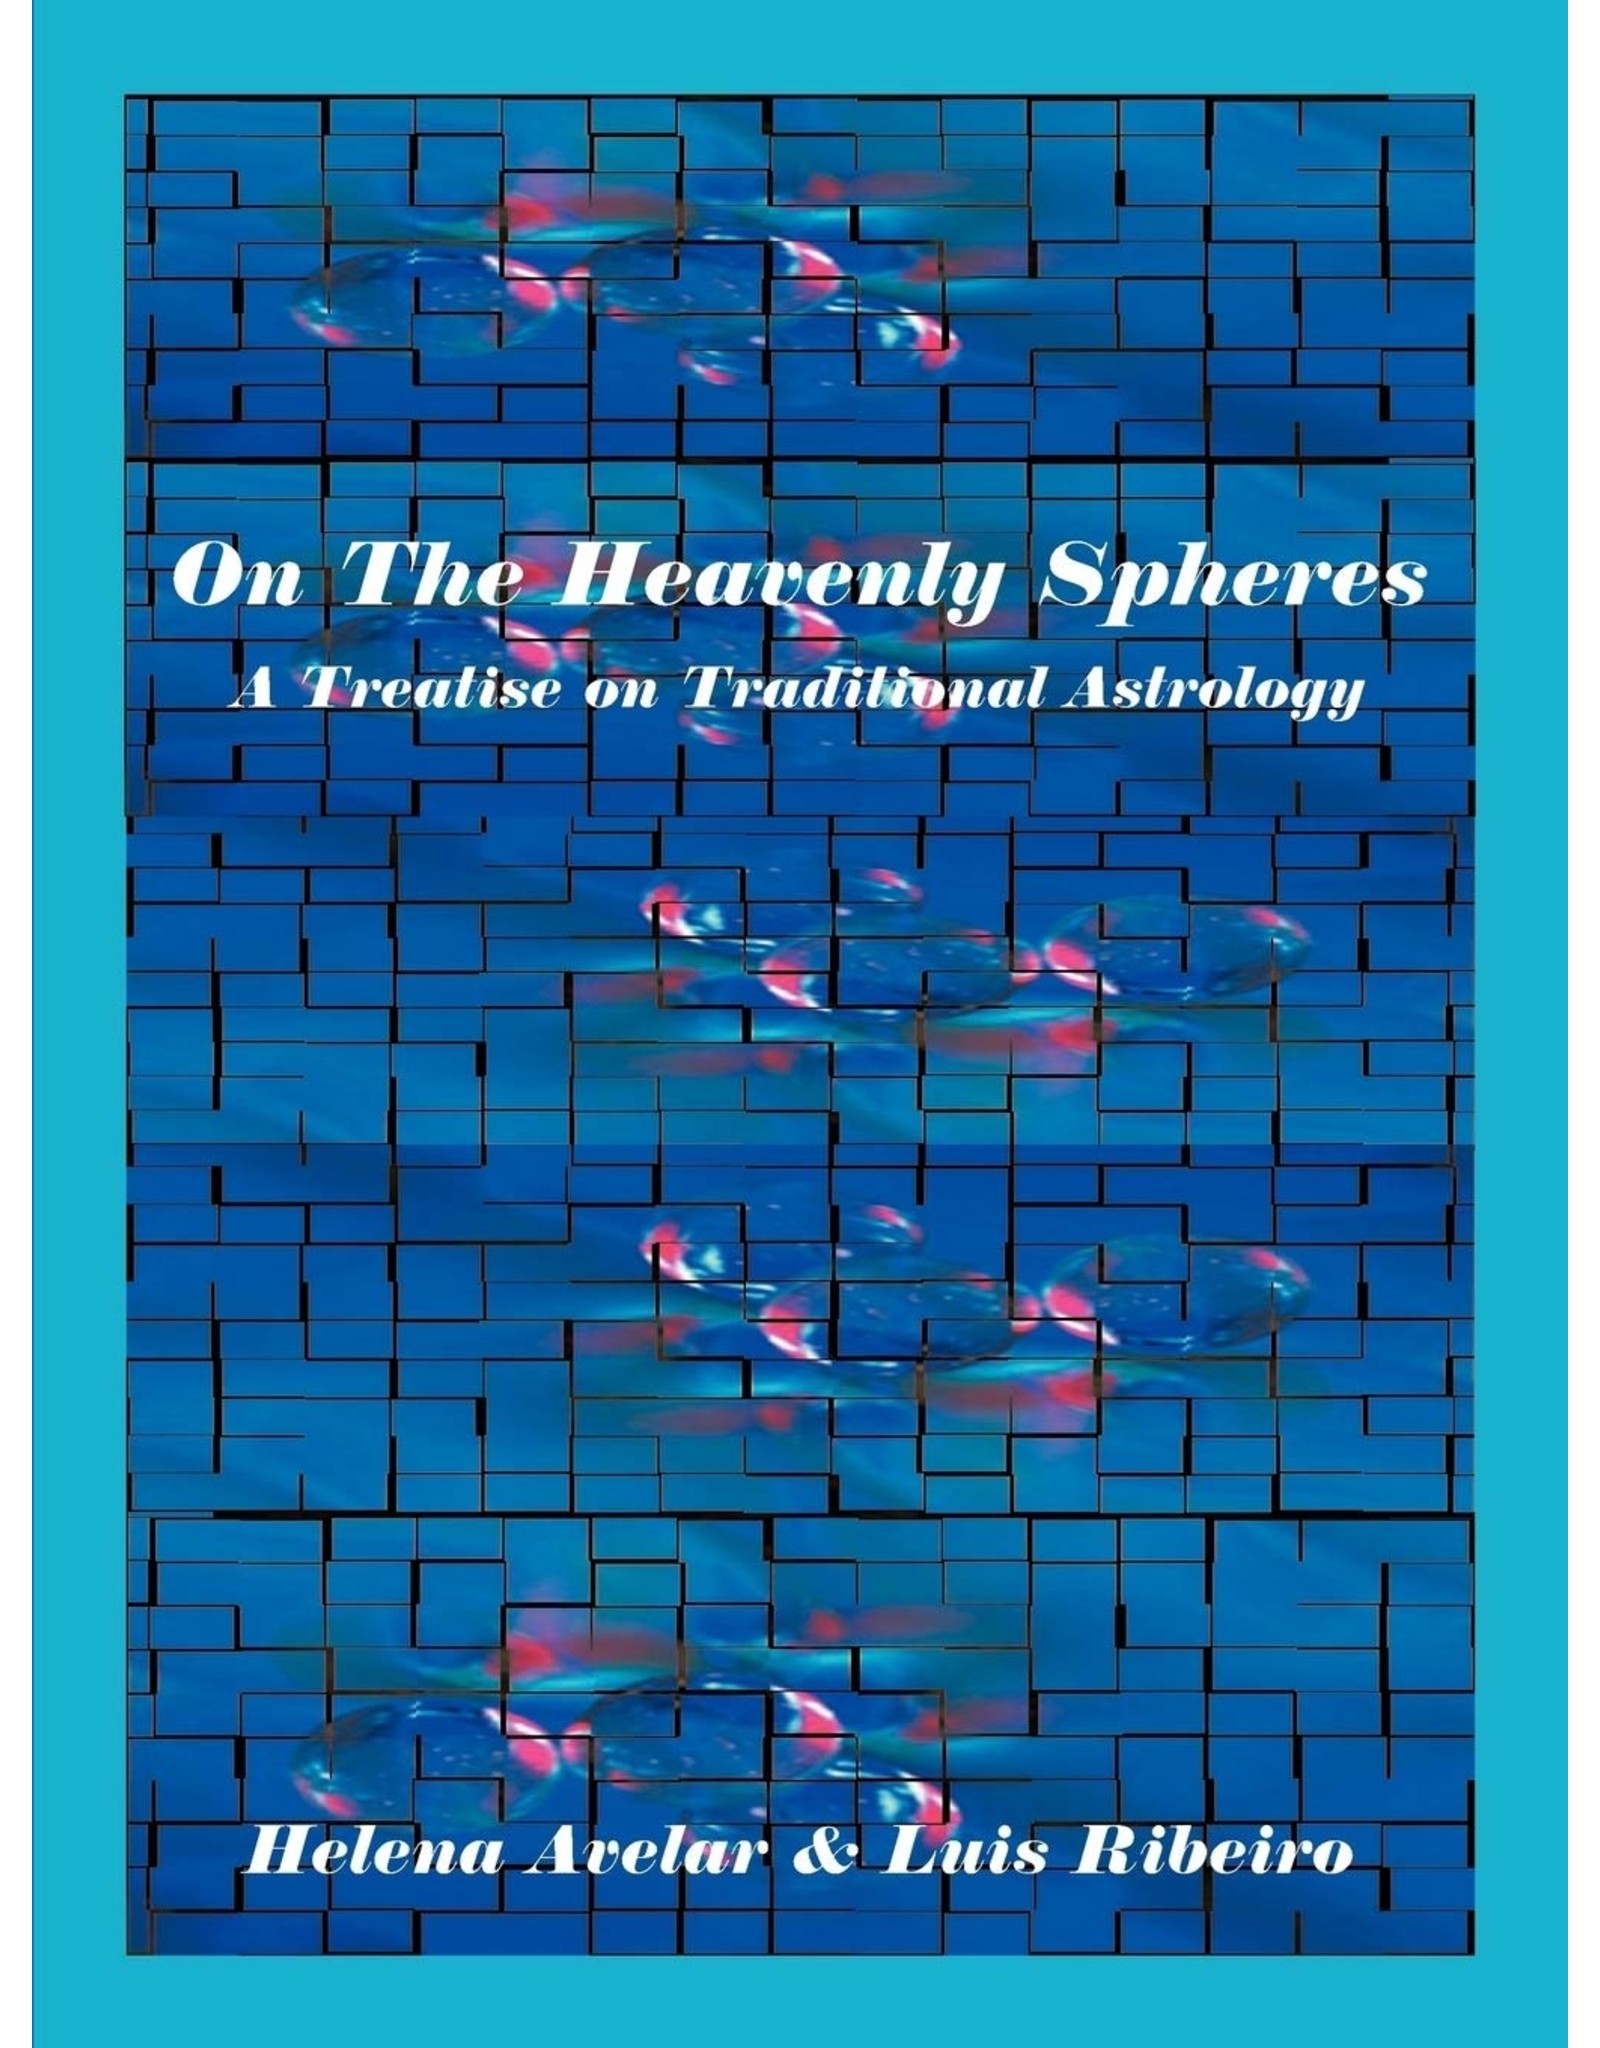 On the Heavenly Spheres: A Treatise on Traditional Astrology